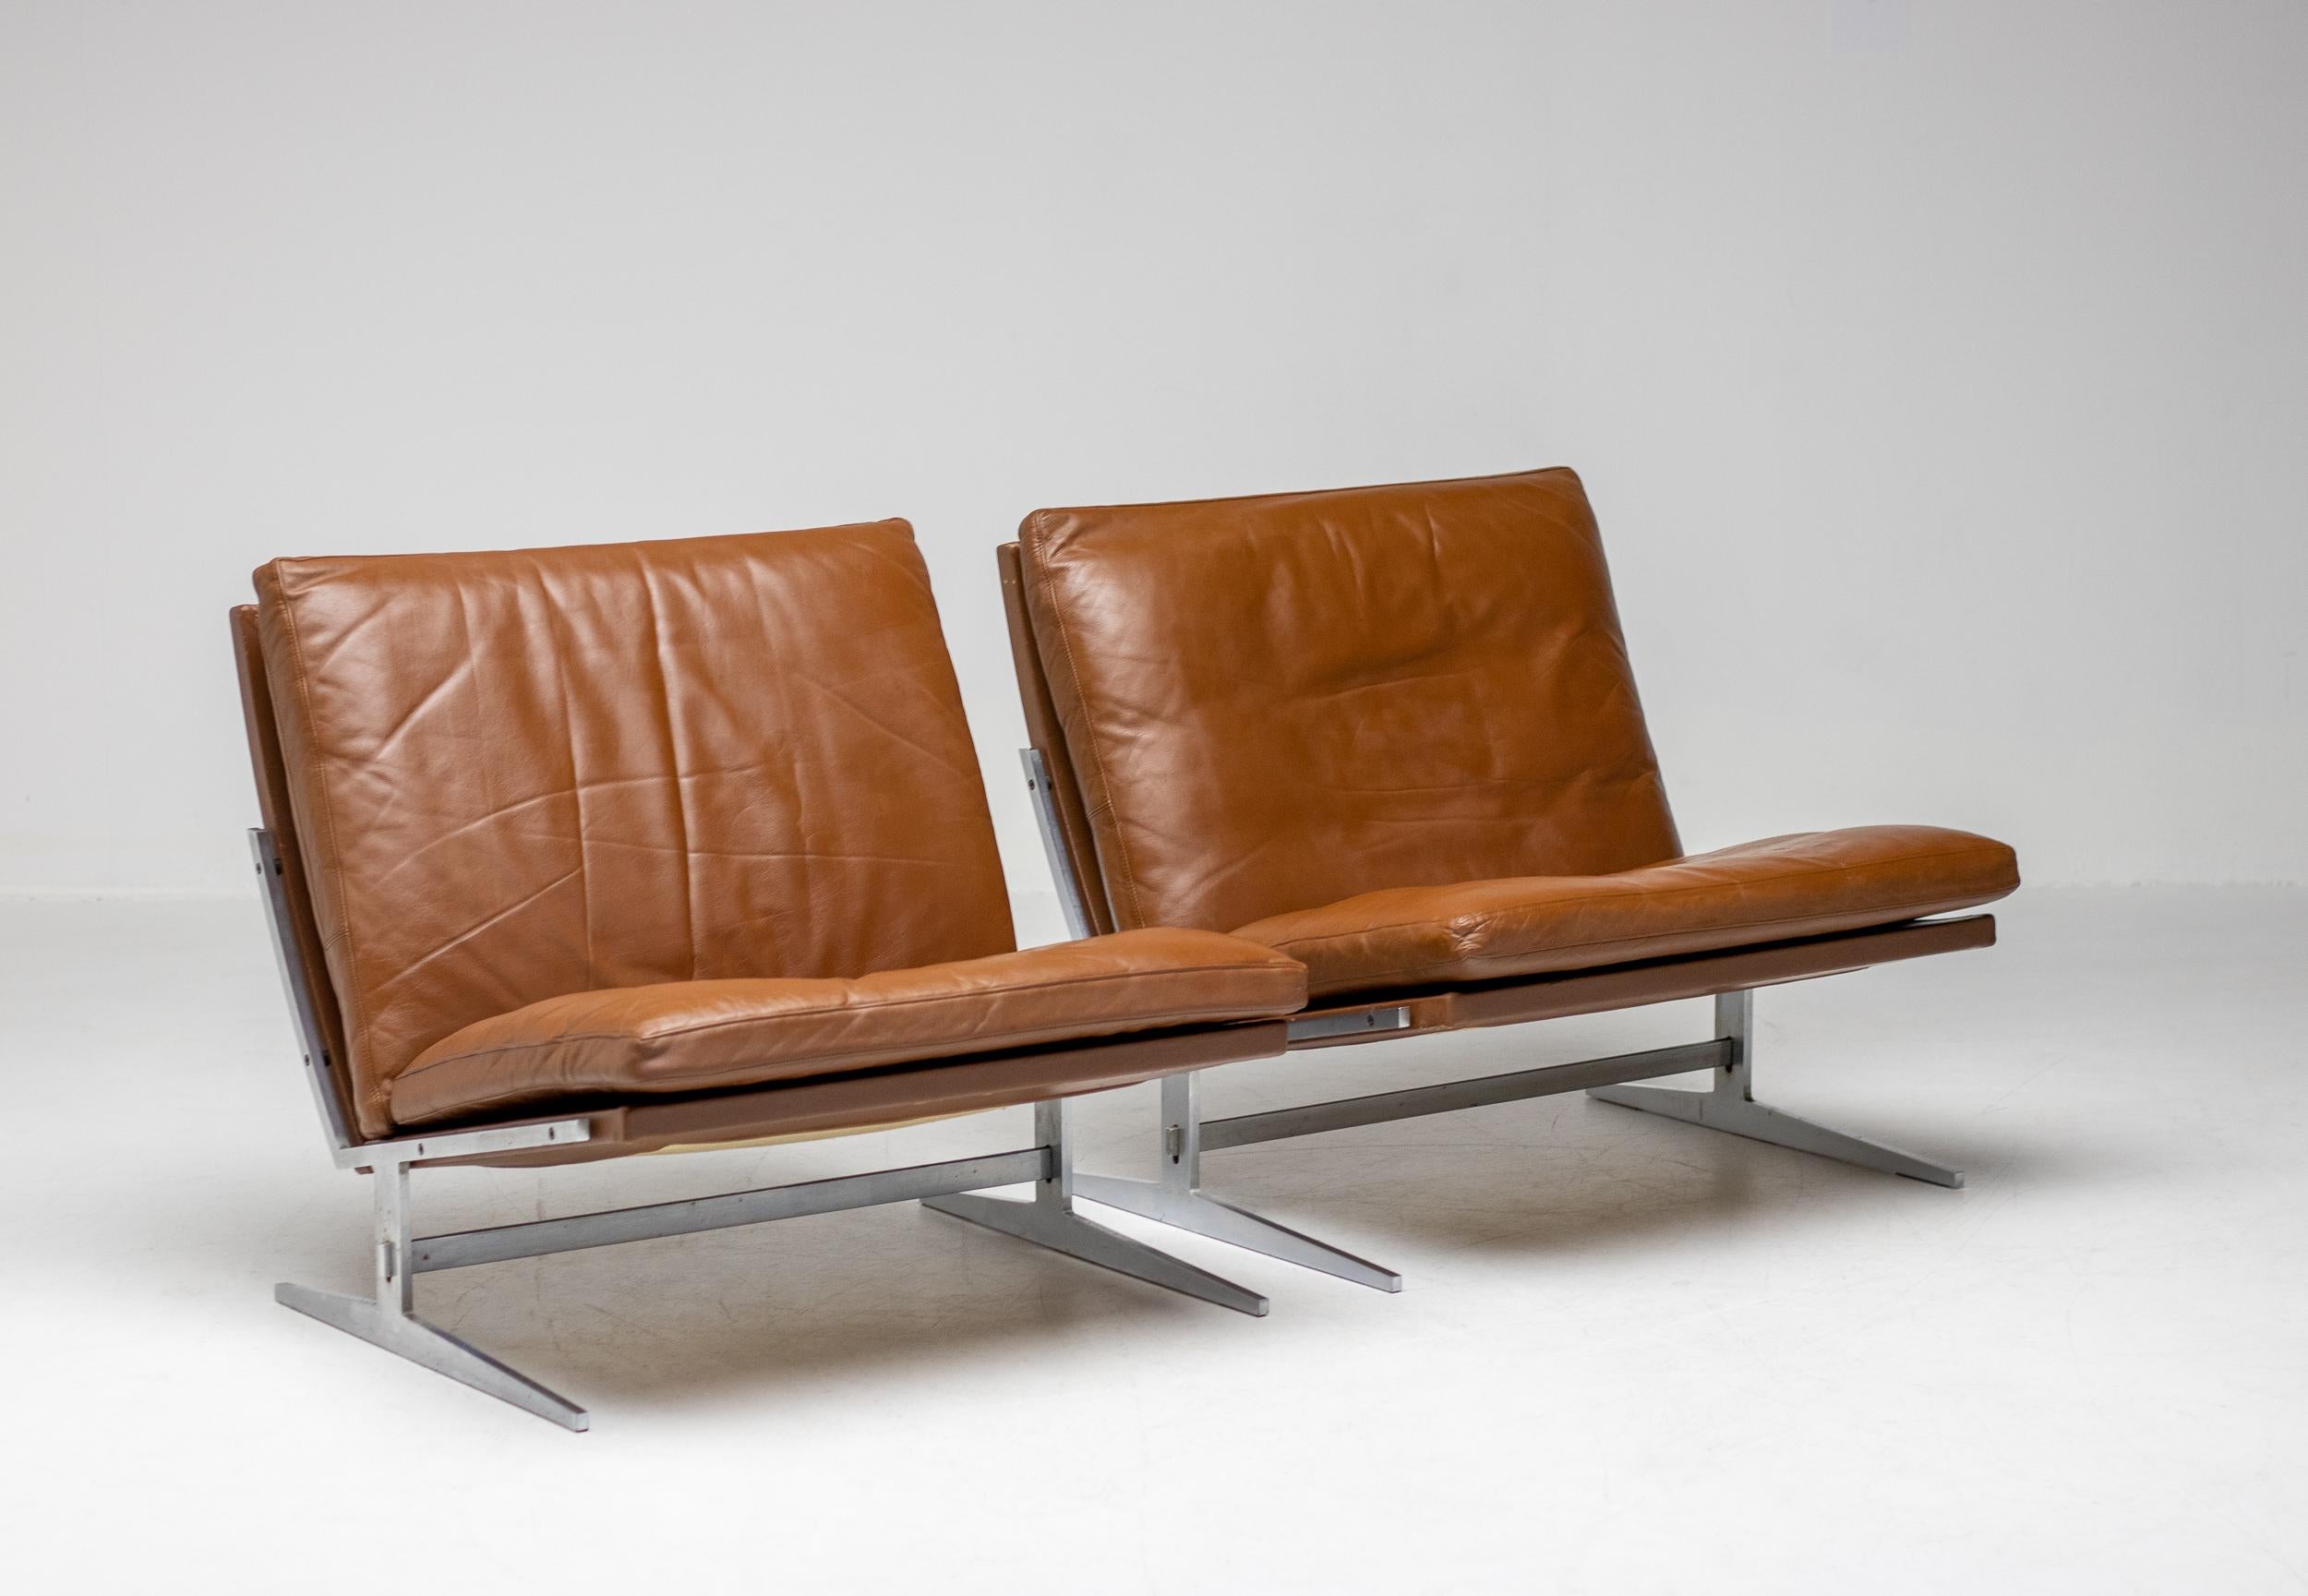 Two Danish BO-561 chairs in matte chromed steel and leather designed by Preben Fabricius & Jorgen Kastholm for BO-EX. These Scandinavian architectural design classics where made circa 1965 and are robust and very comfortable. They are in very nice